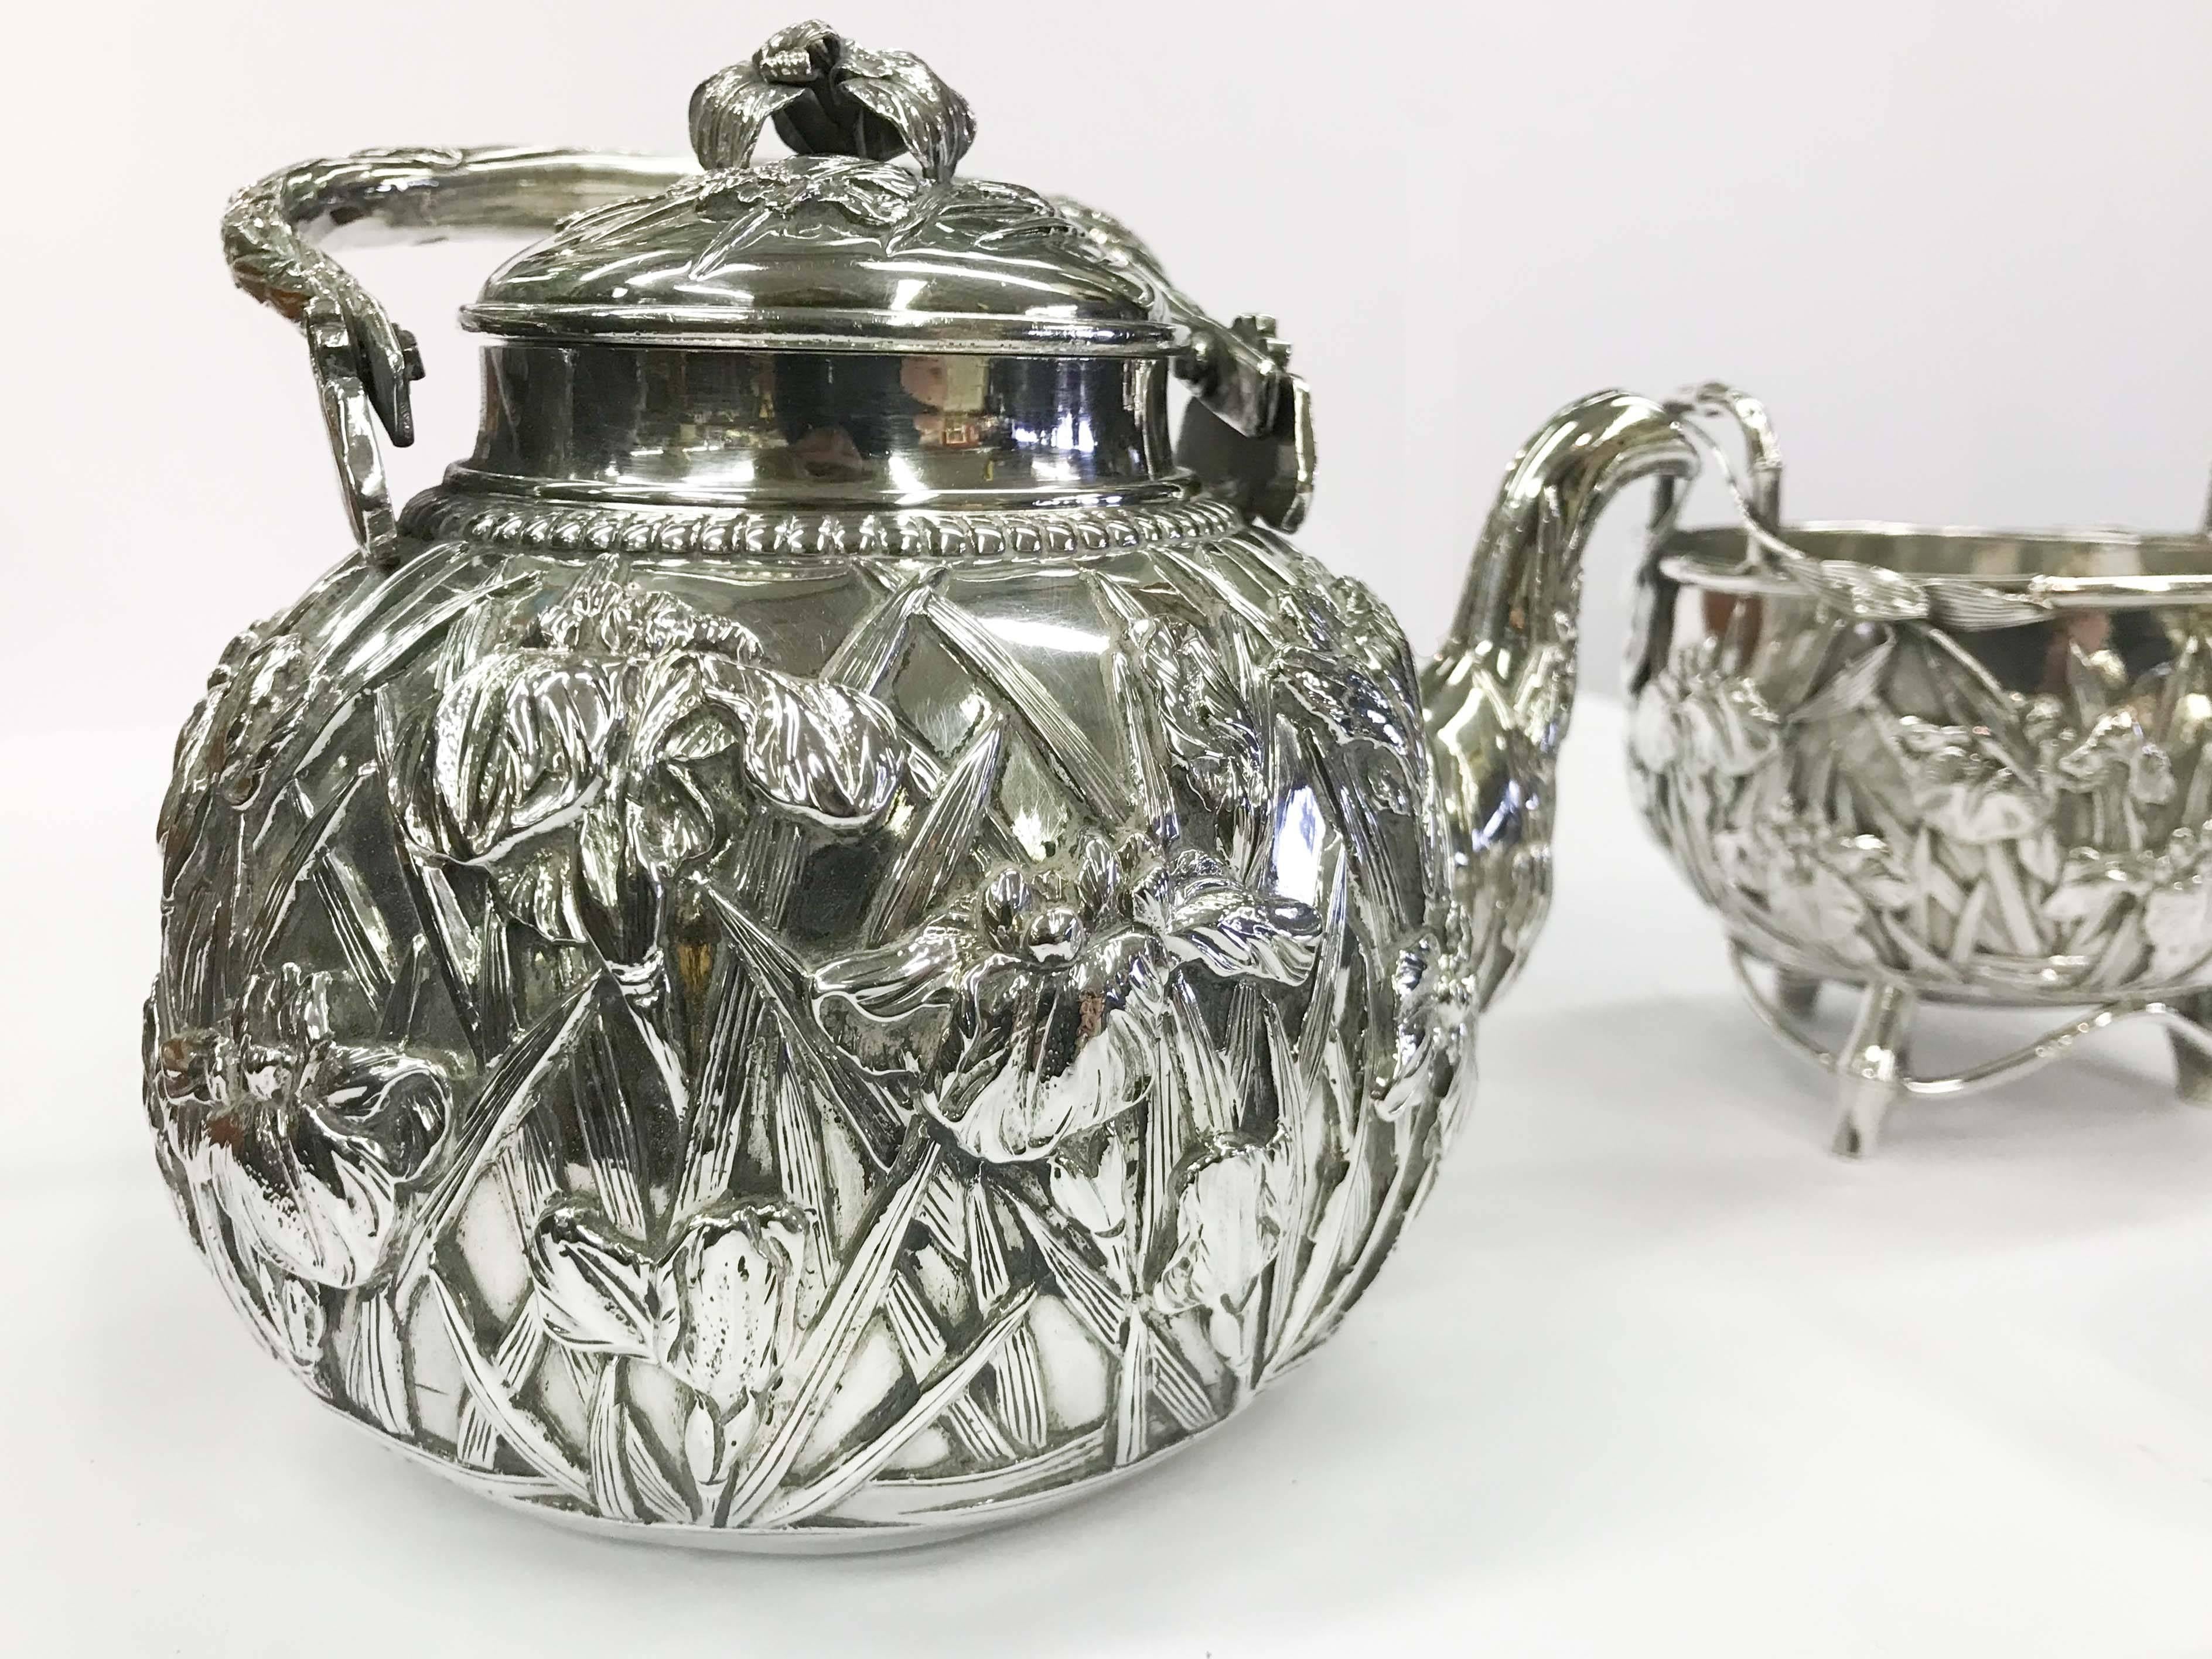 A solid 9.25 sterling silver Japanese repoussé tea set. Includes teapot, sugar bowl and creamer. Very good overall condition, some minor impressions on bottom of vessels consistent with age and use. Total weight 931 grams. 